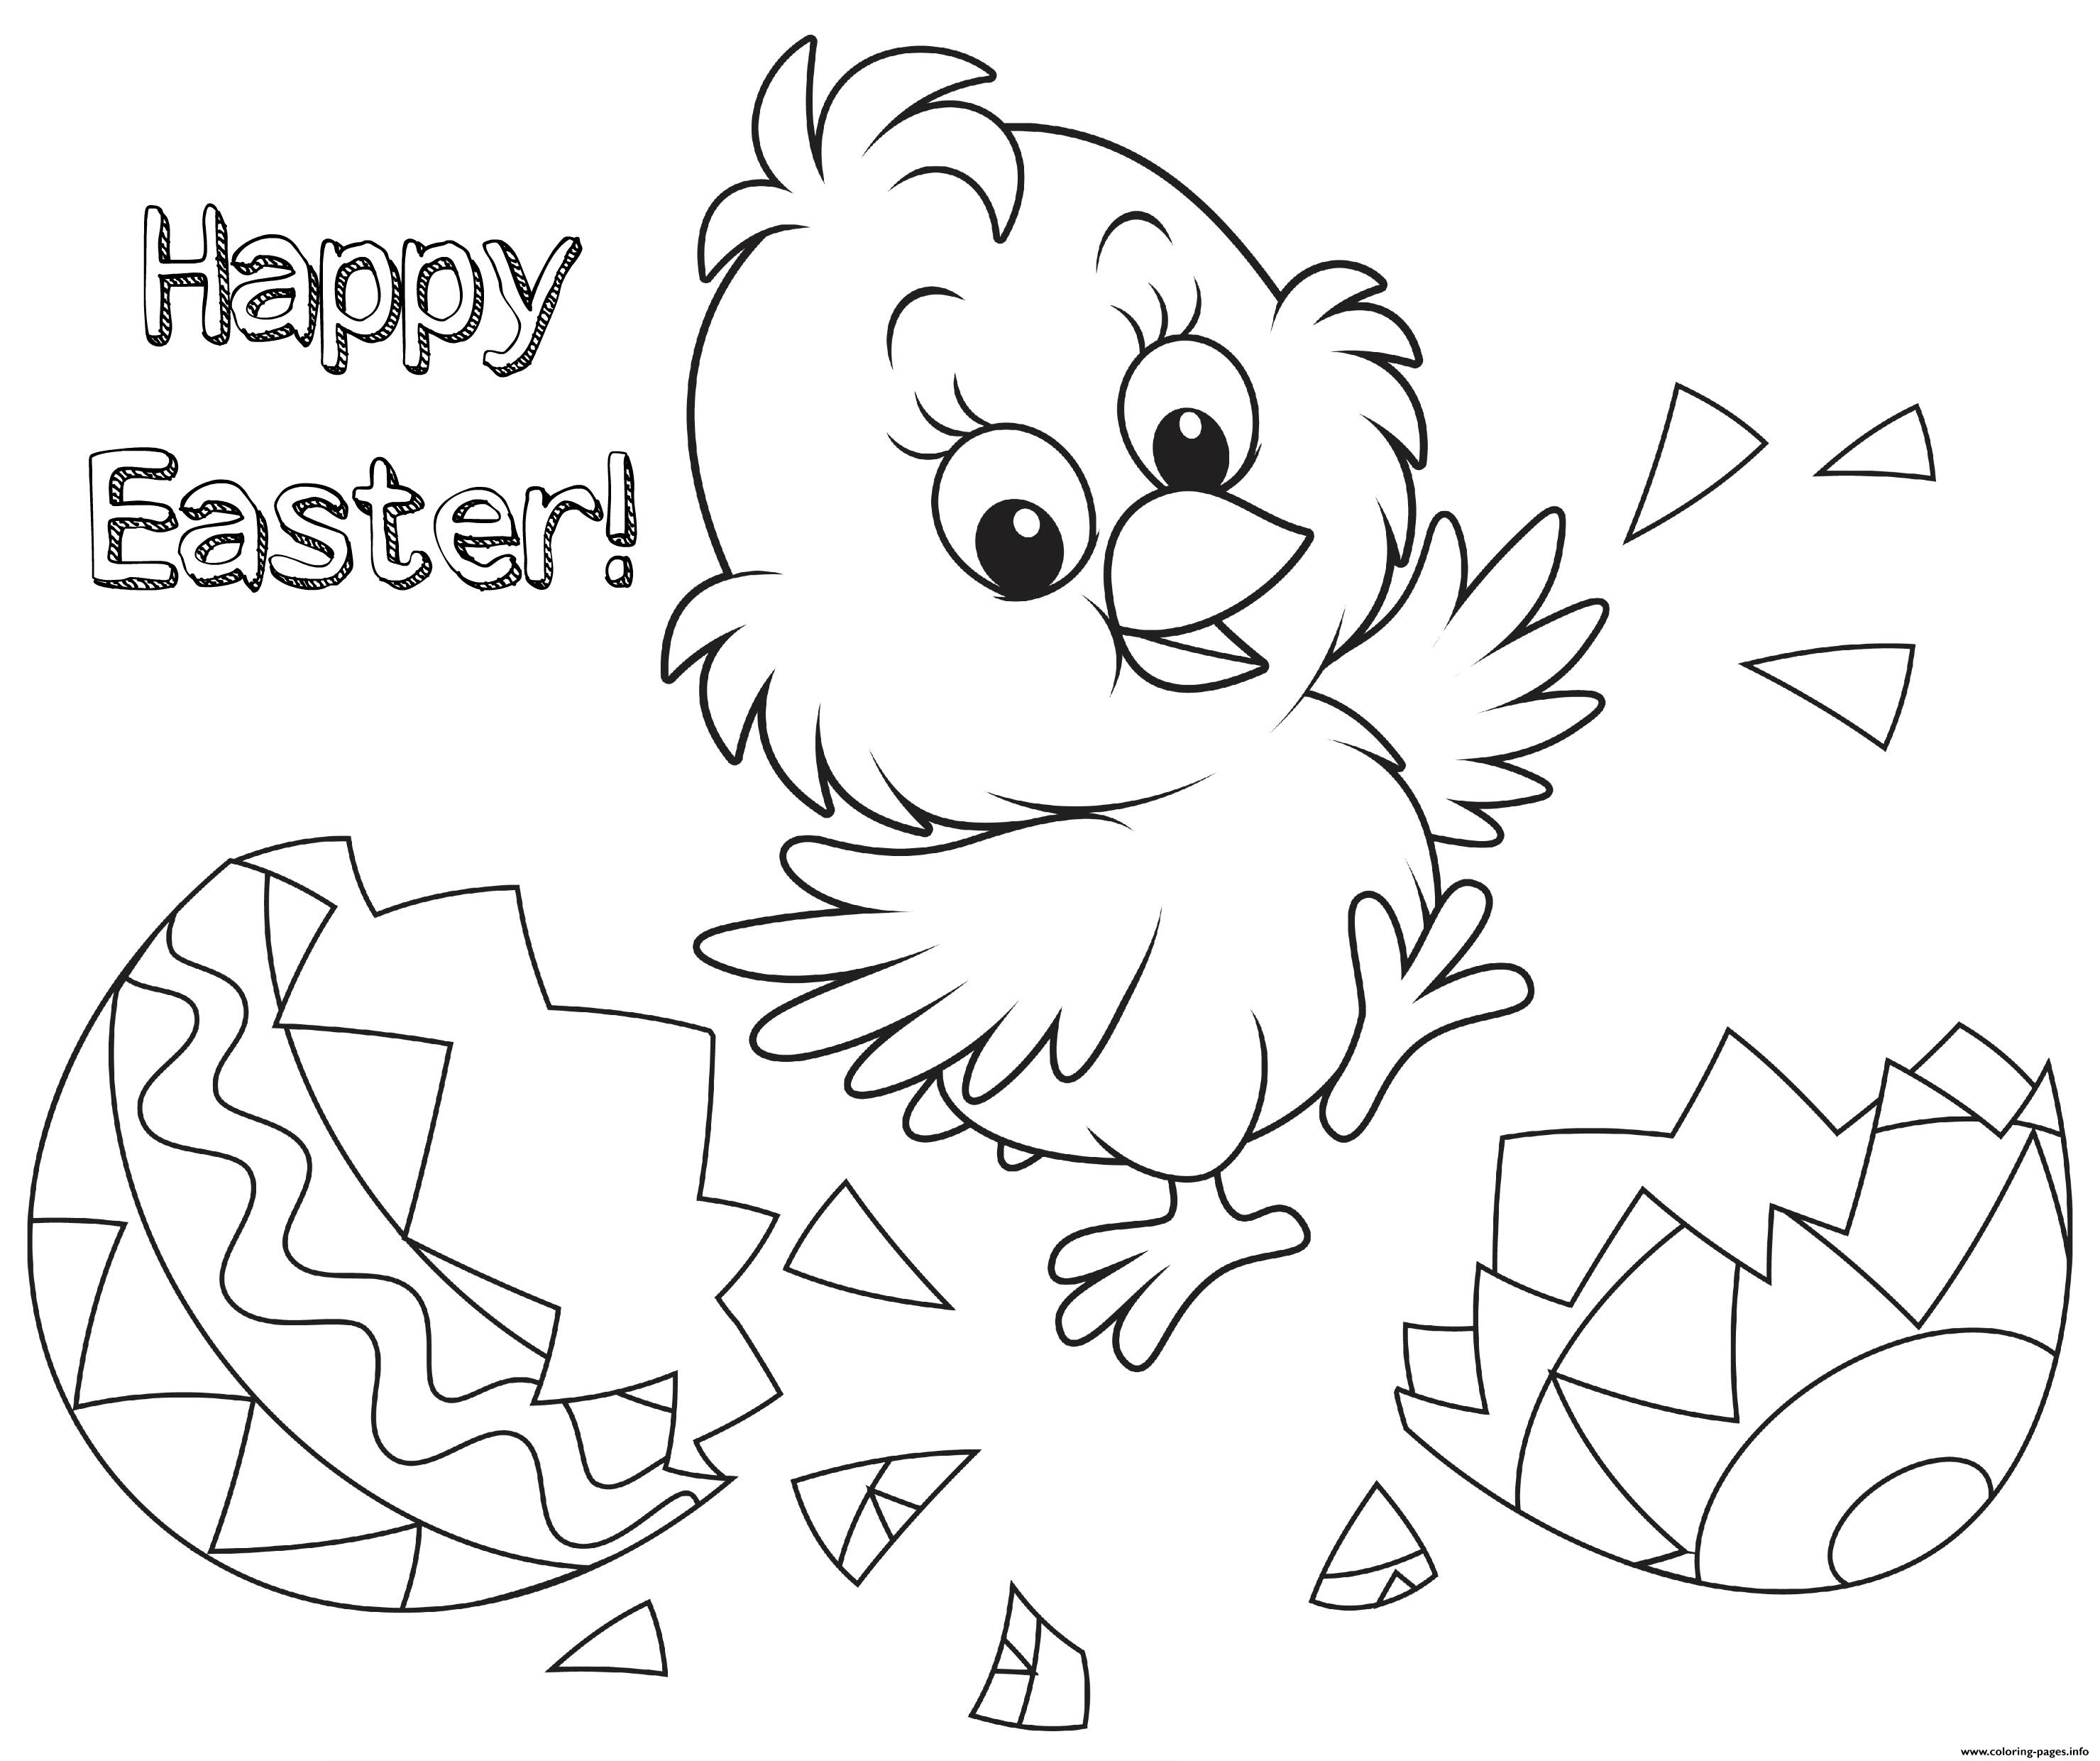 Happy Easter Chick Egg coloring